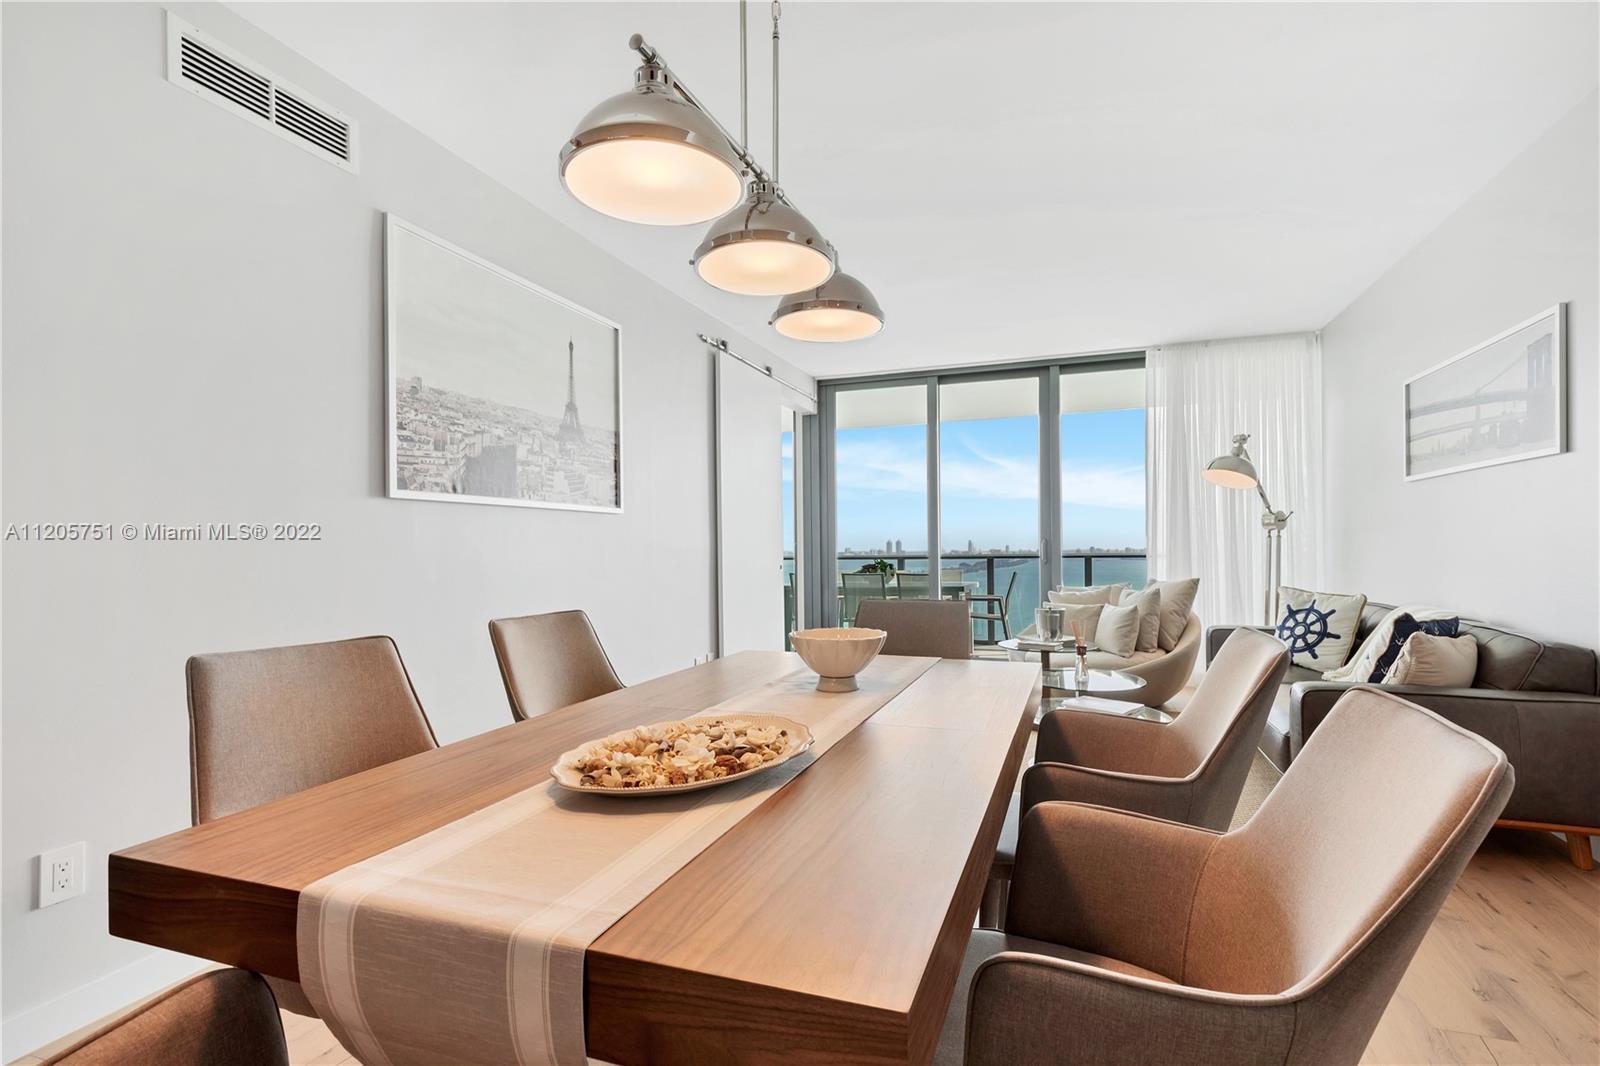 Located on the 23rd floor and Meticulously finished by a a European designer this spacious Bayfront 